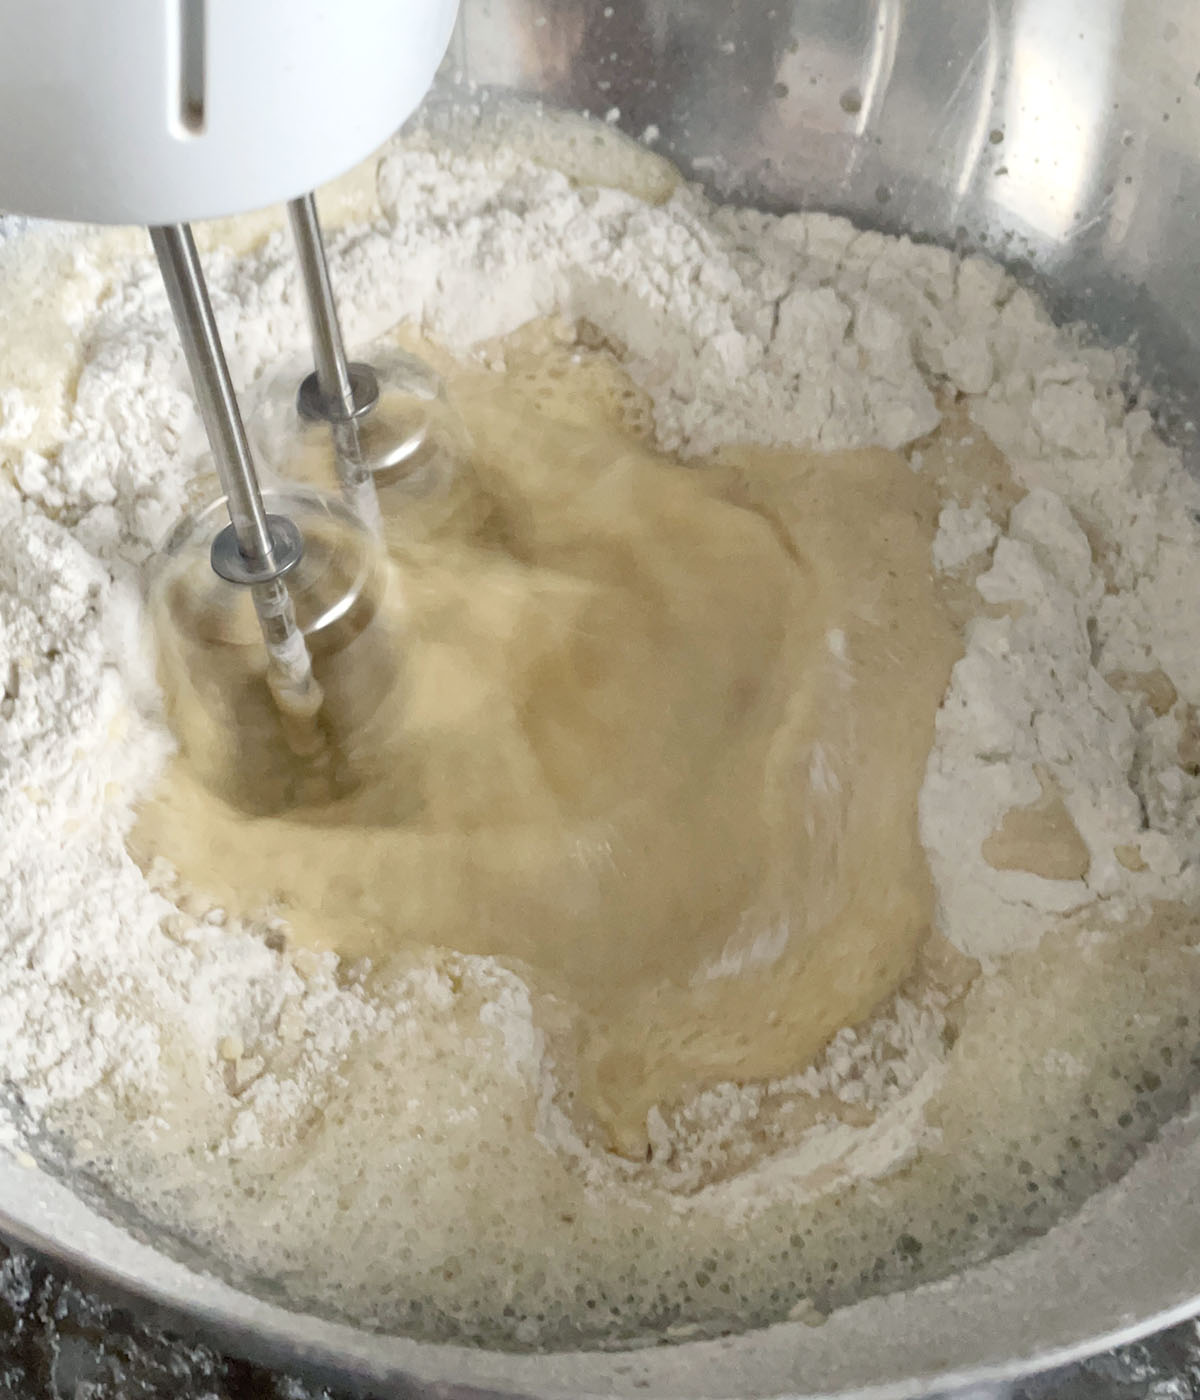 A mixer blending wet and dry ingredients in a round metal bowl.